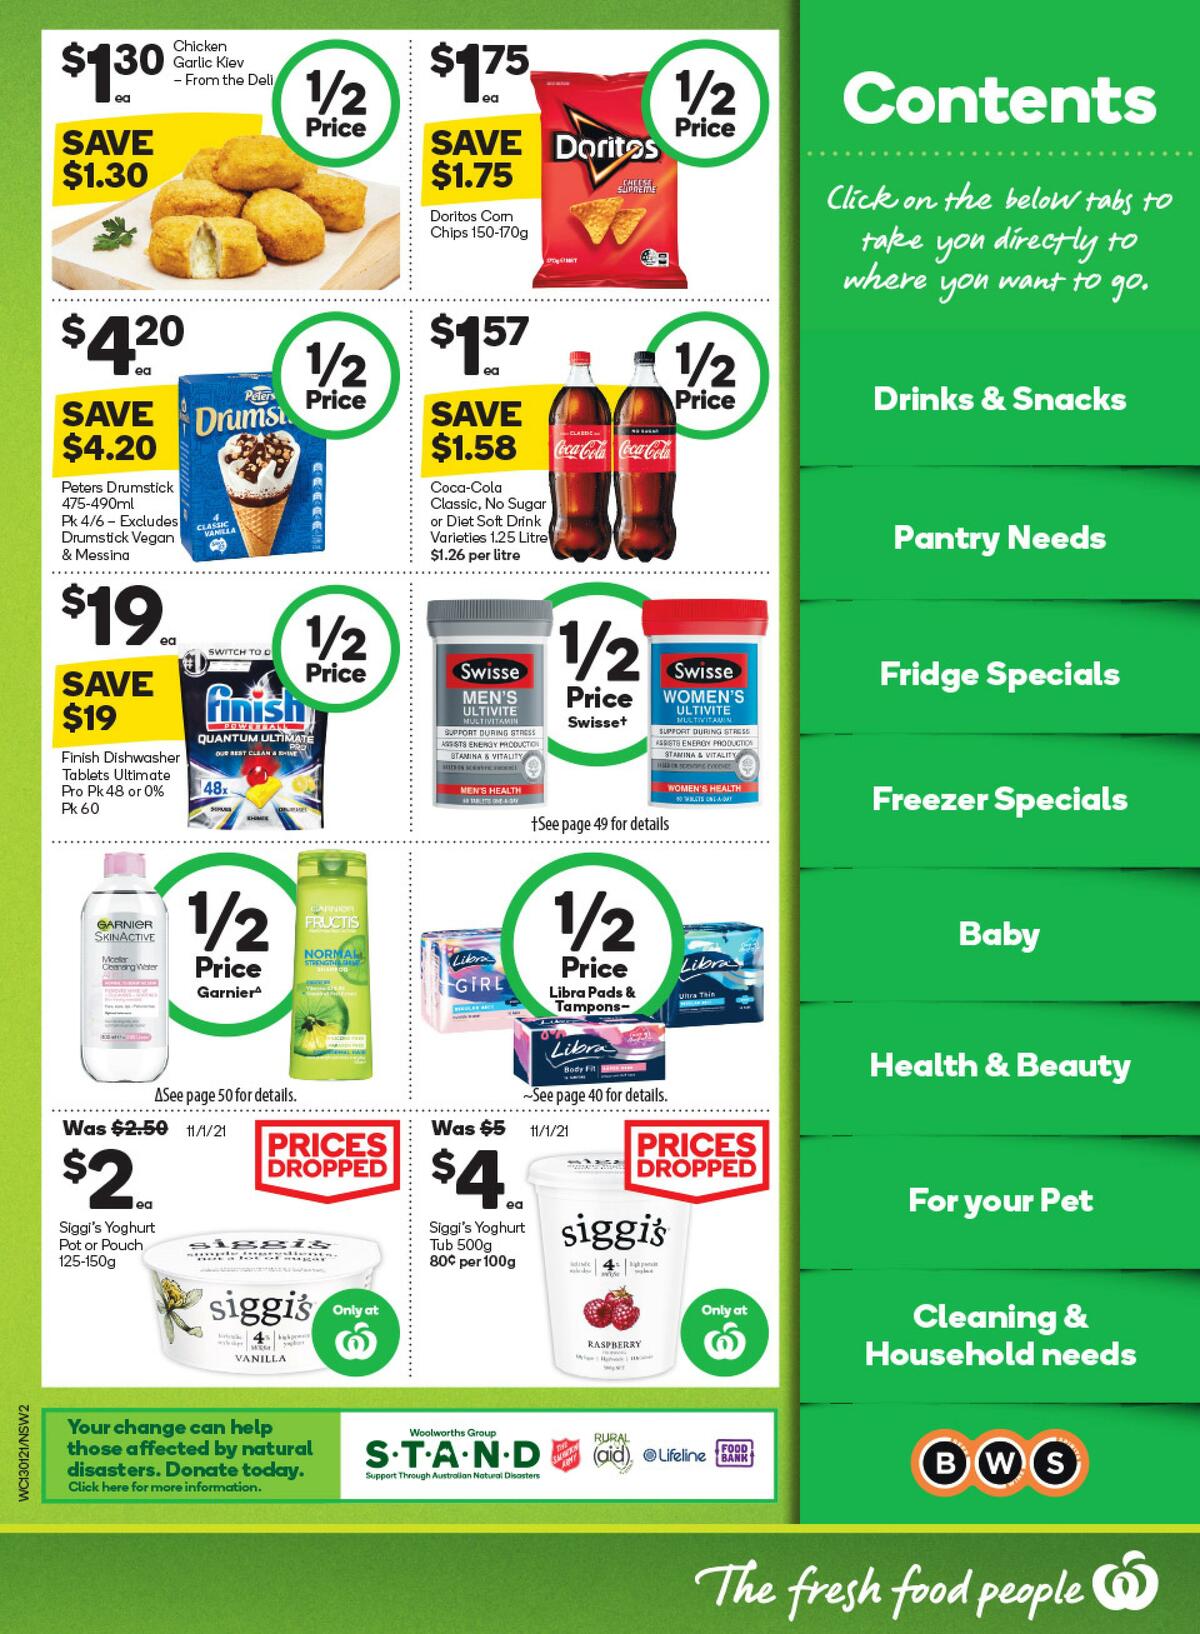 Woolworths Catalogues from 13 January